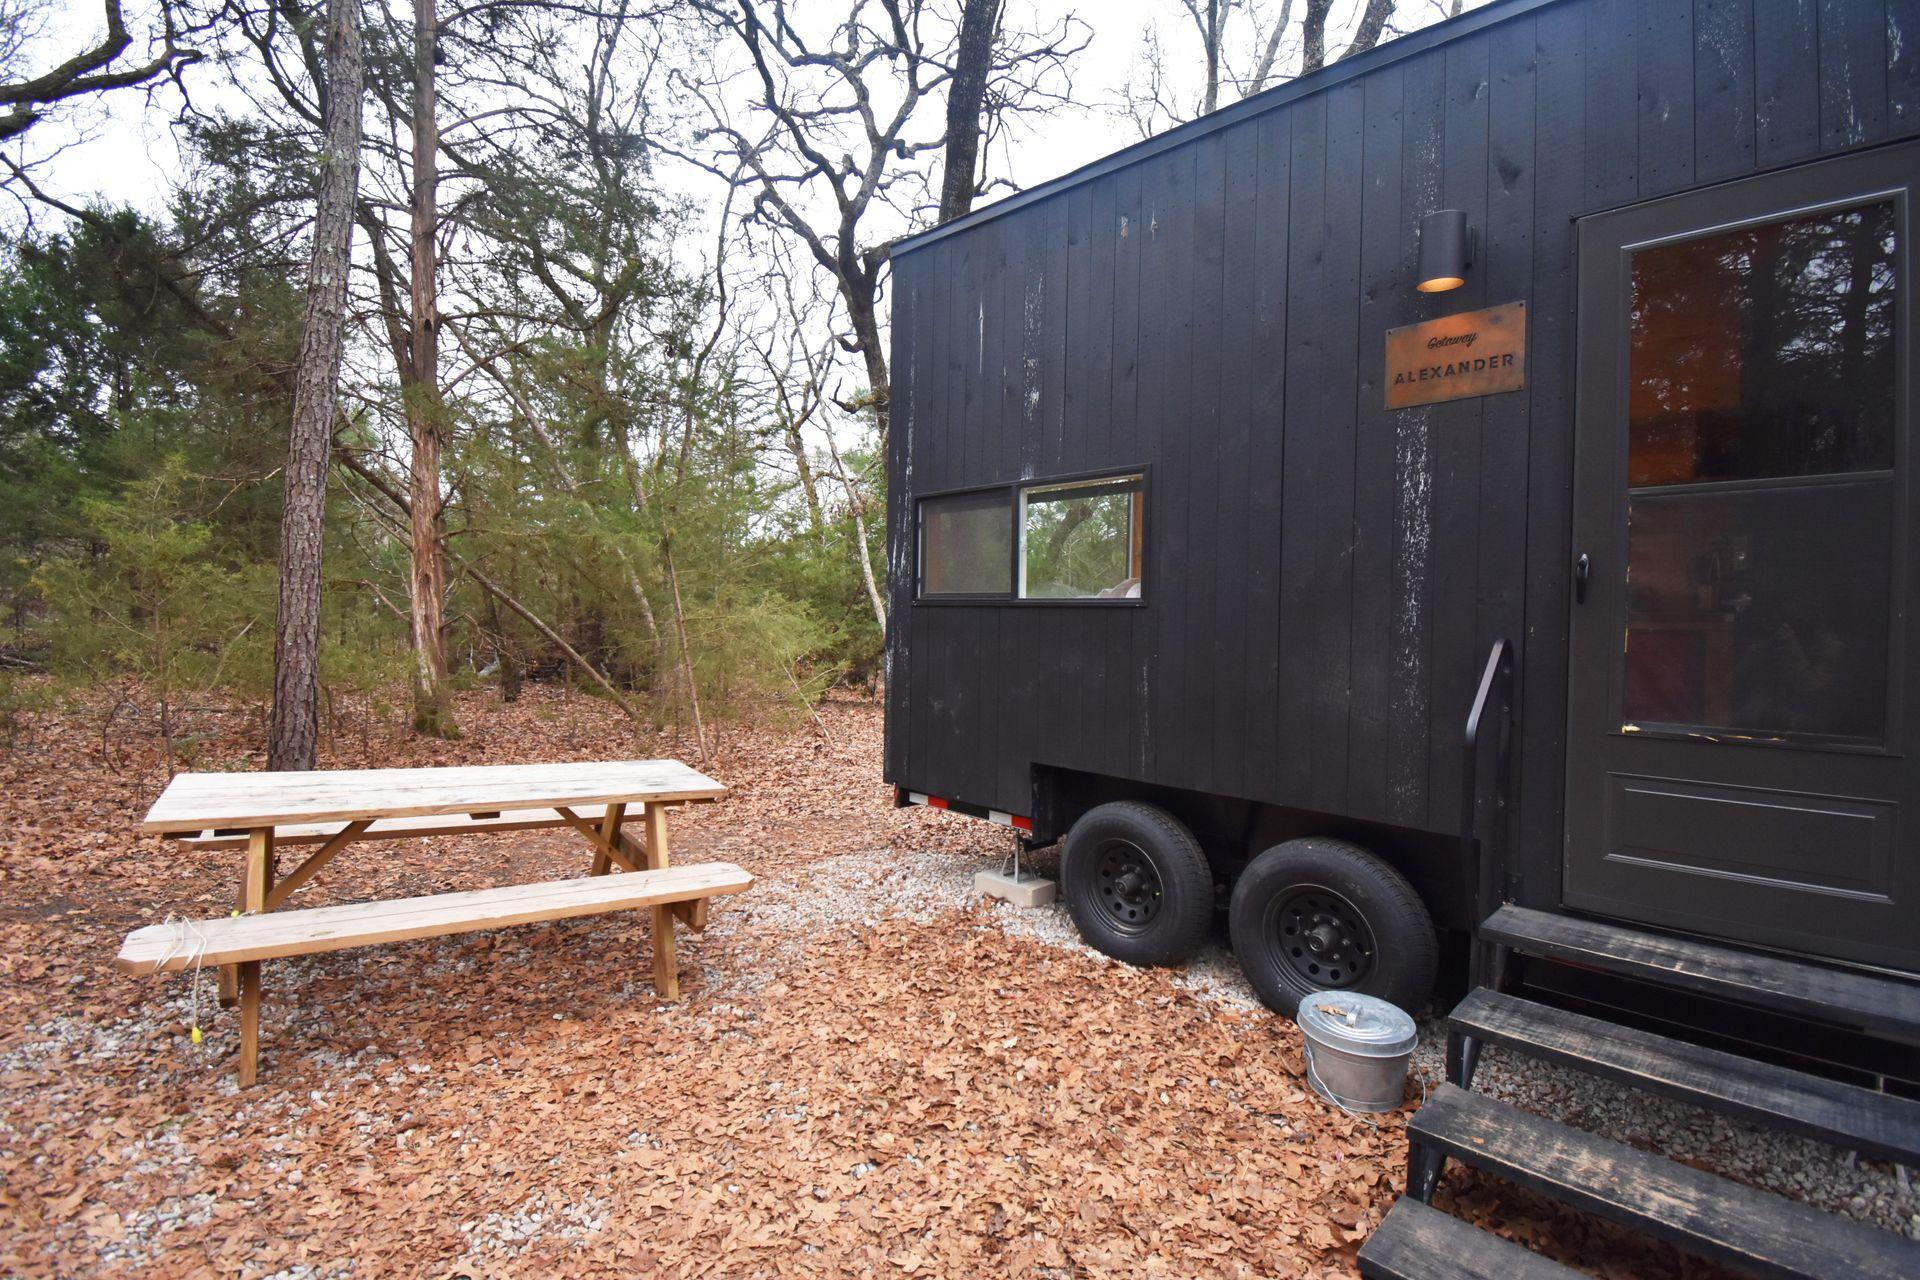 The tiny home on wheels at the Getaway Cabin in the Piney Woods of Texas.